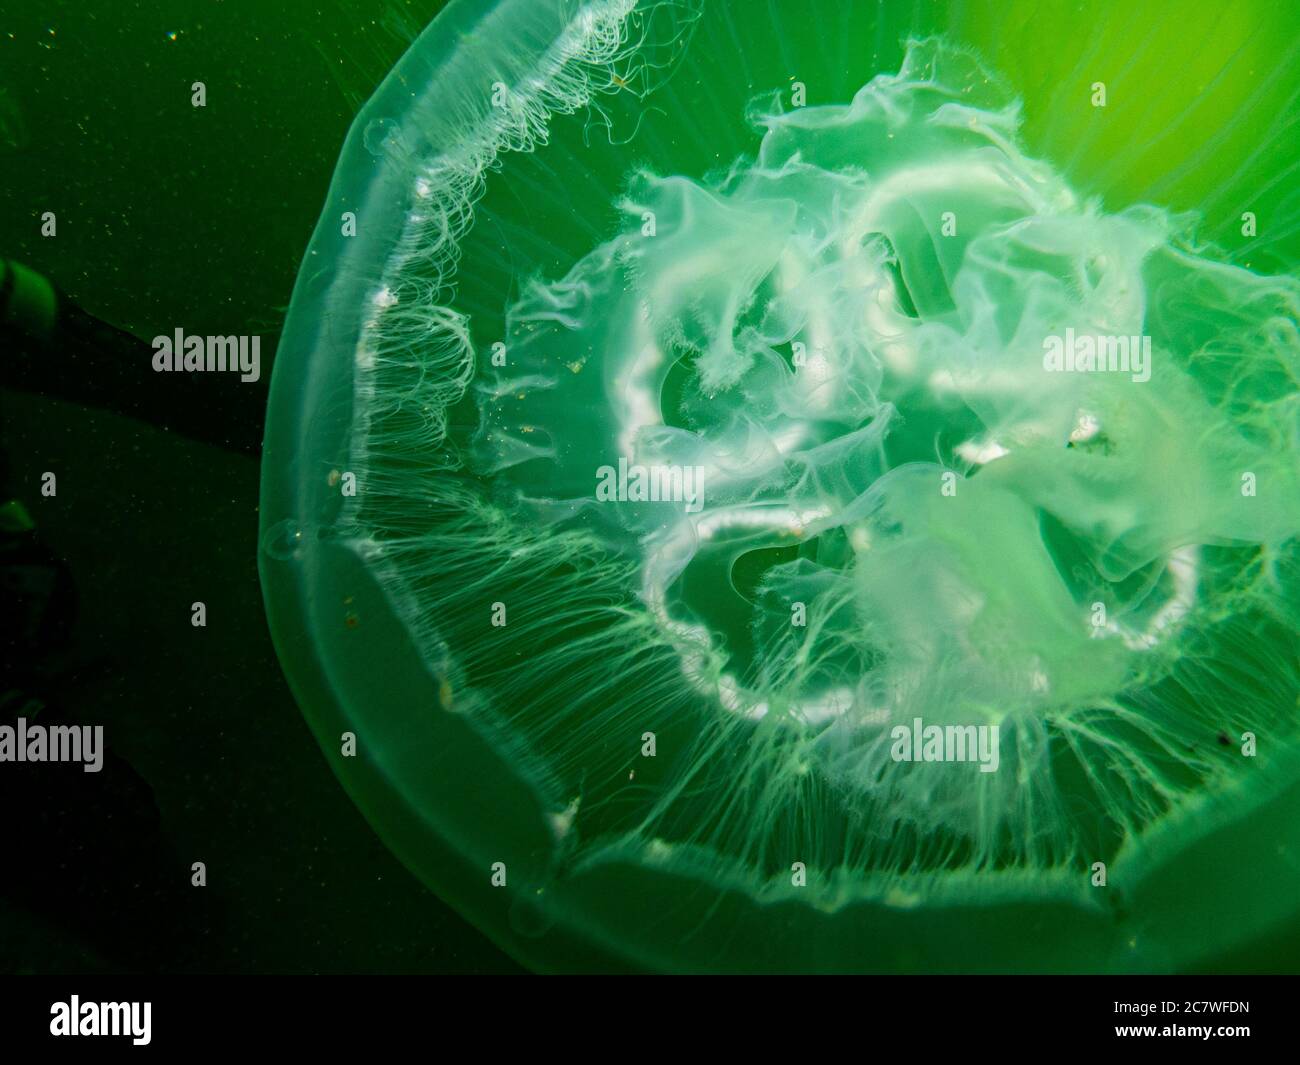 An amazing Jellyfish appears in green isolated in black water. Picture from Oresund, Malmo in southern Sweden. Cold green water. Stock Photo